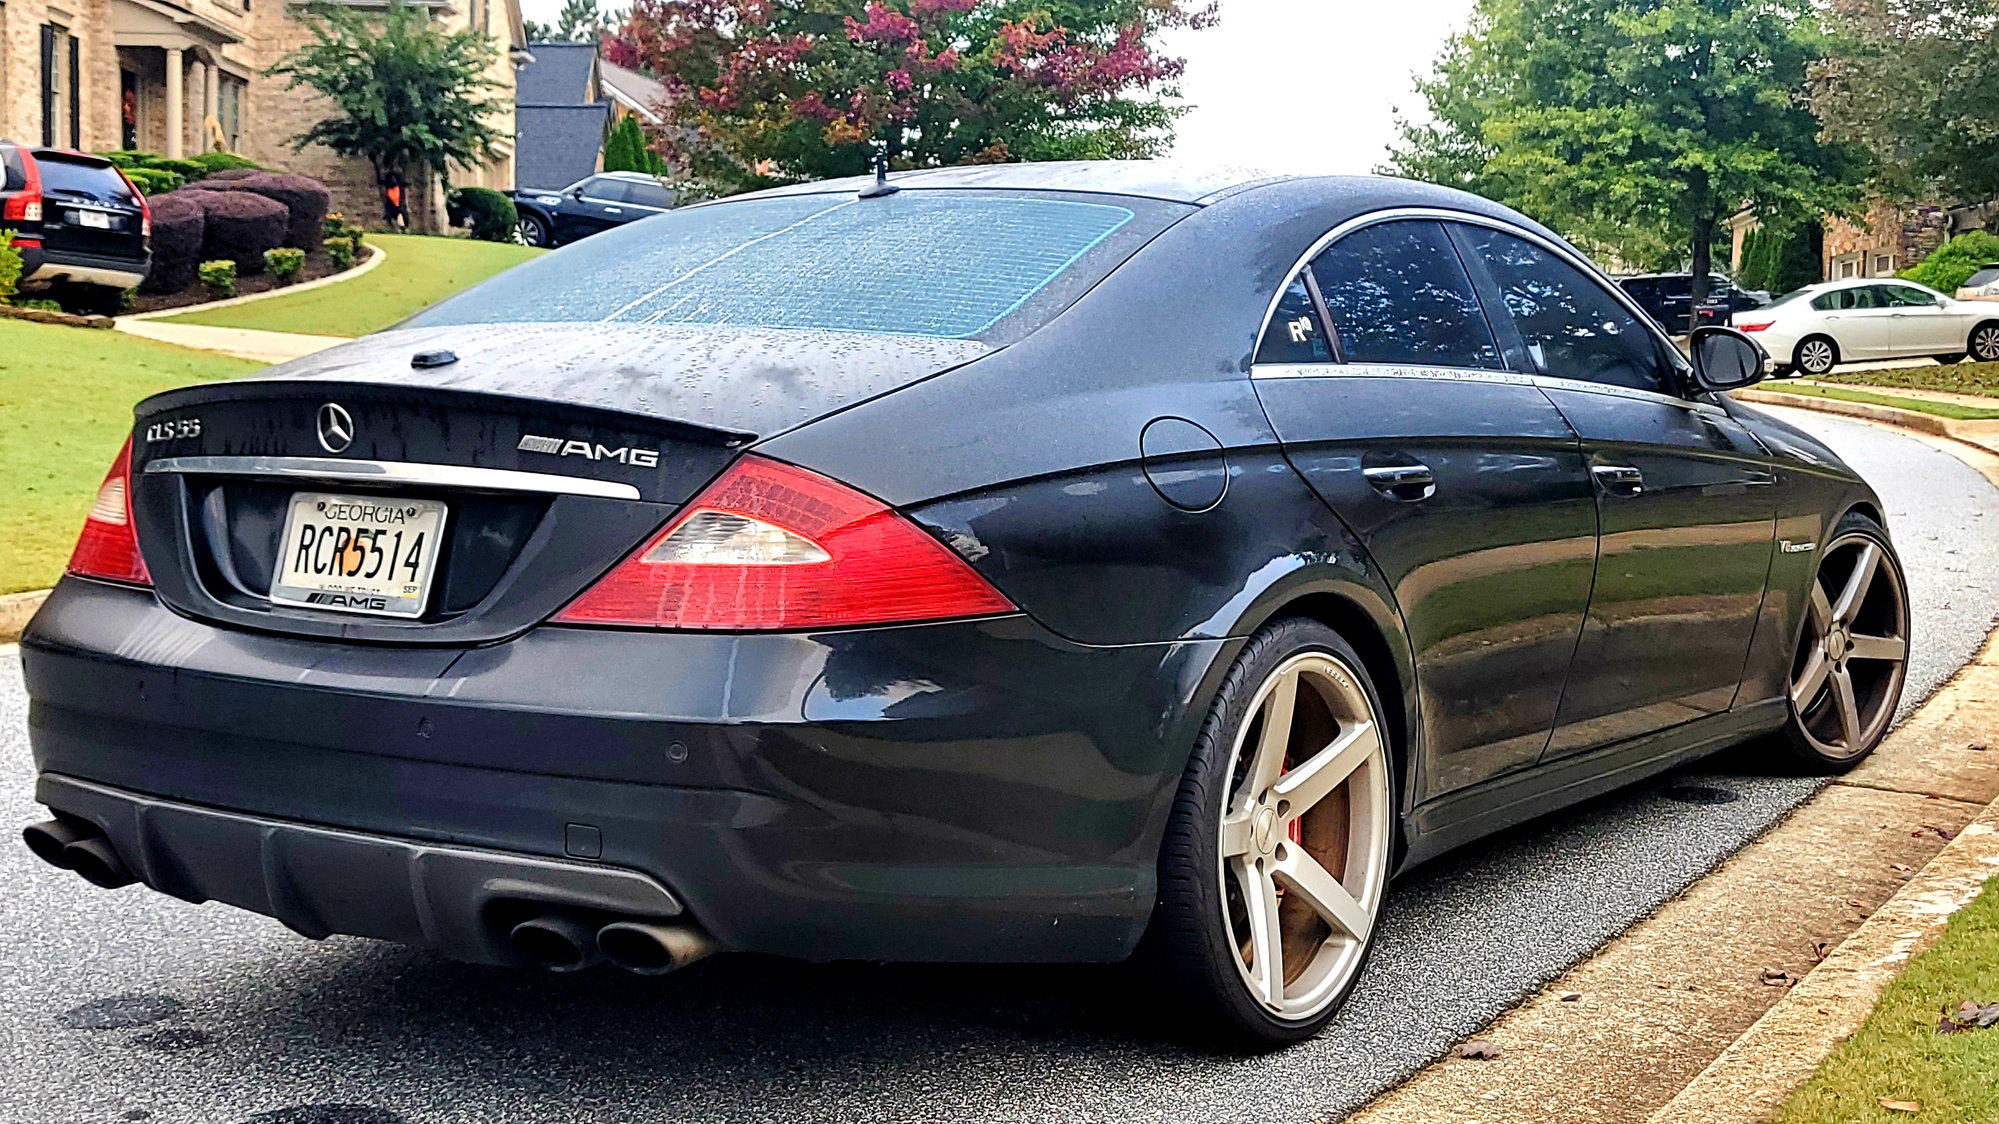 2006 Mercedes-Benz CLS55 AMG - Weistec CLS55 AMG-Clean and tastefully modified - Used - VIN WDDDJ76X56A070050 - 118,500 Miles - 8 cyl - 4WD - Automatic - Sedan - Marietta, GA 30064, United States